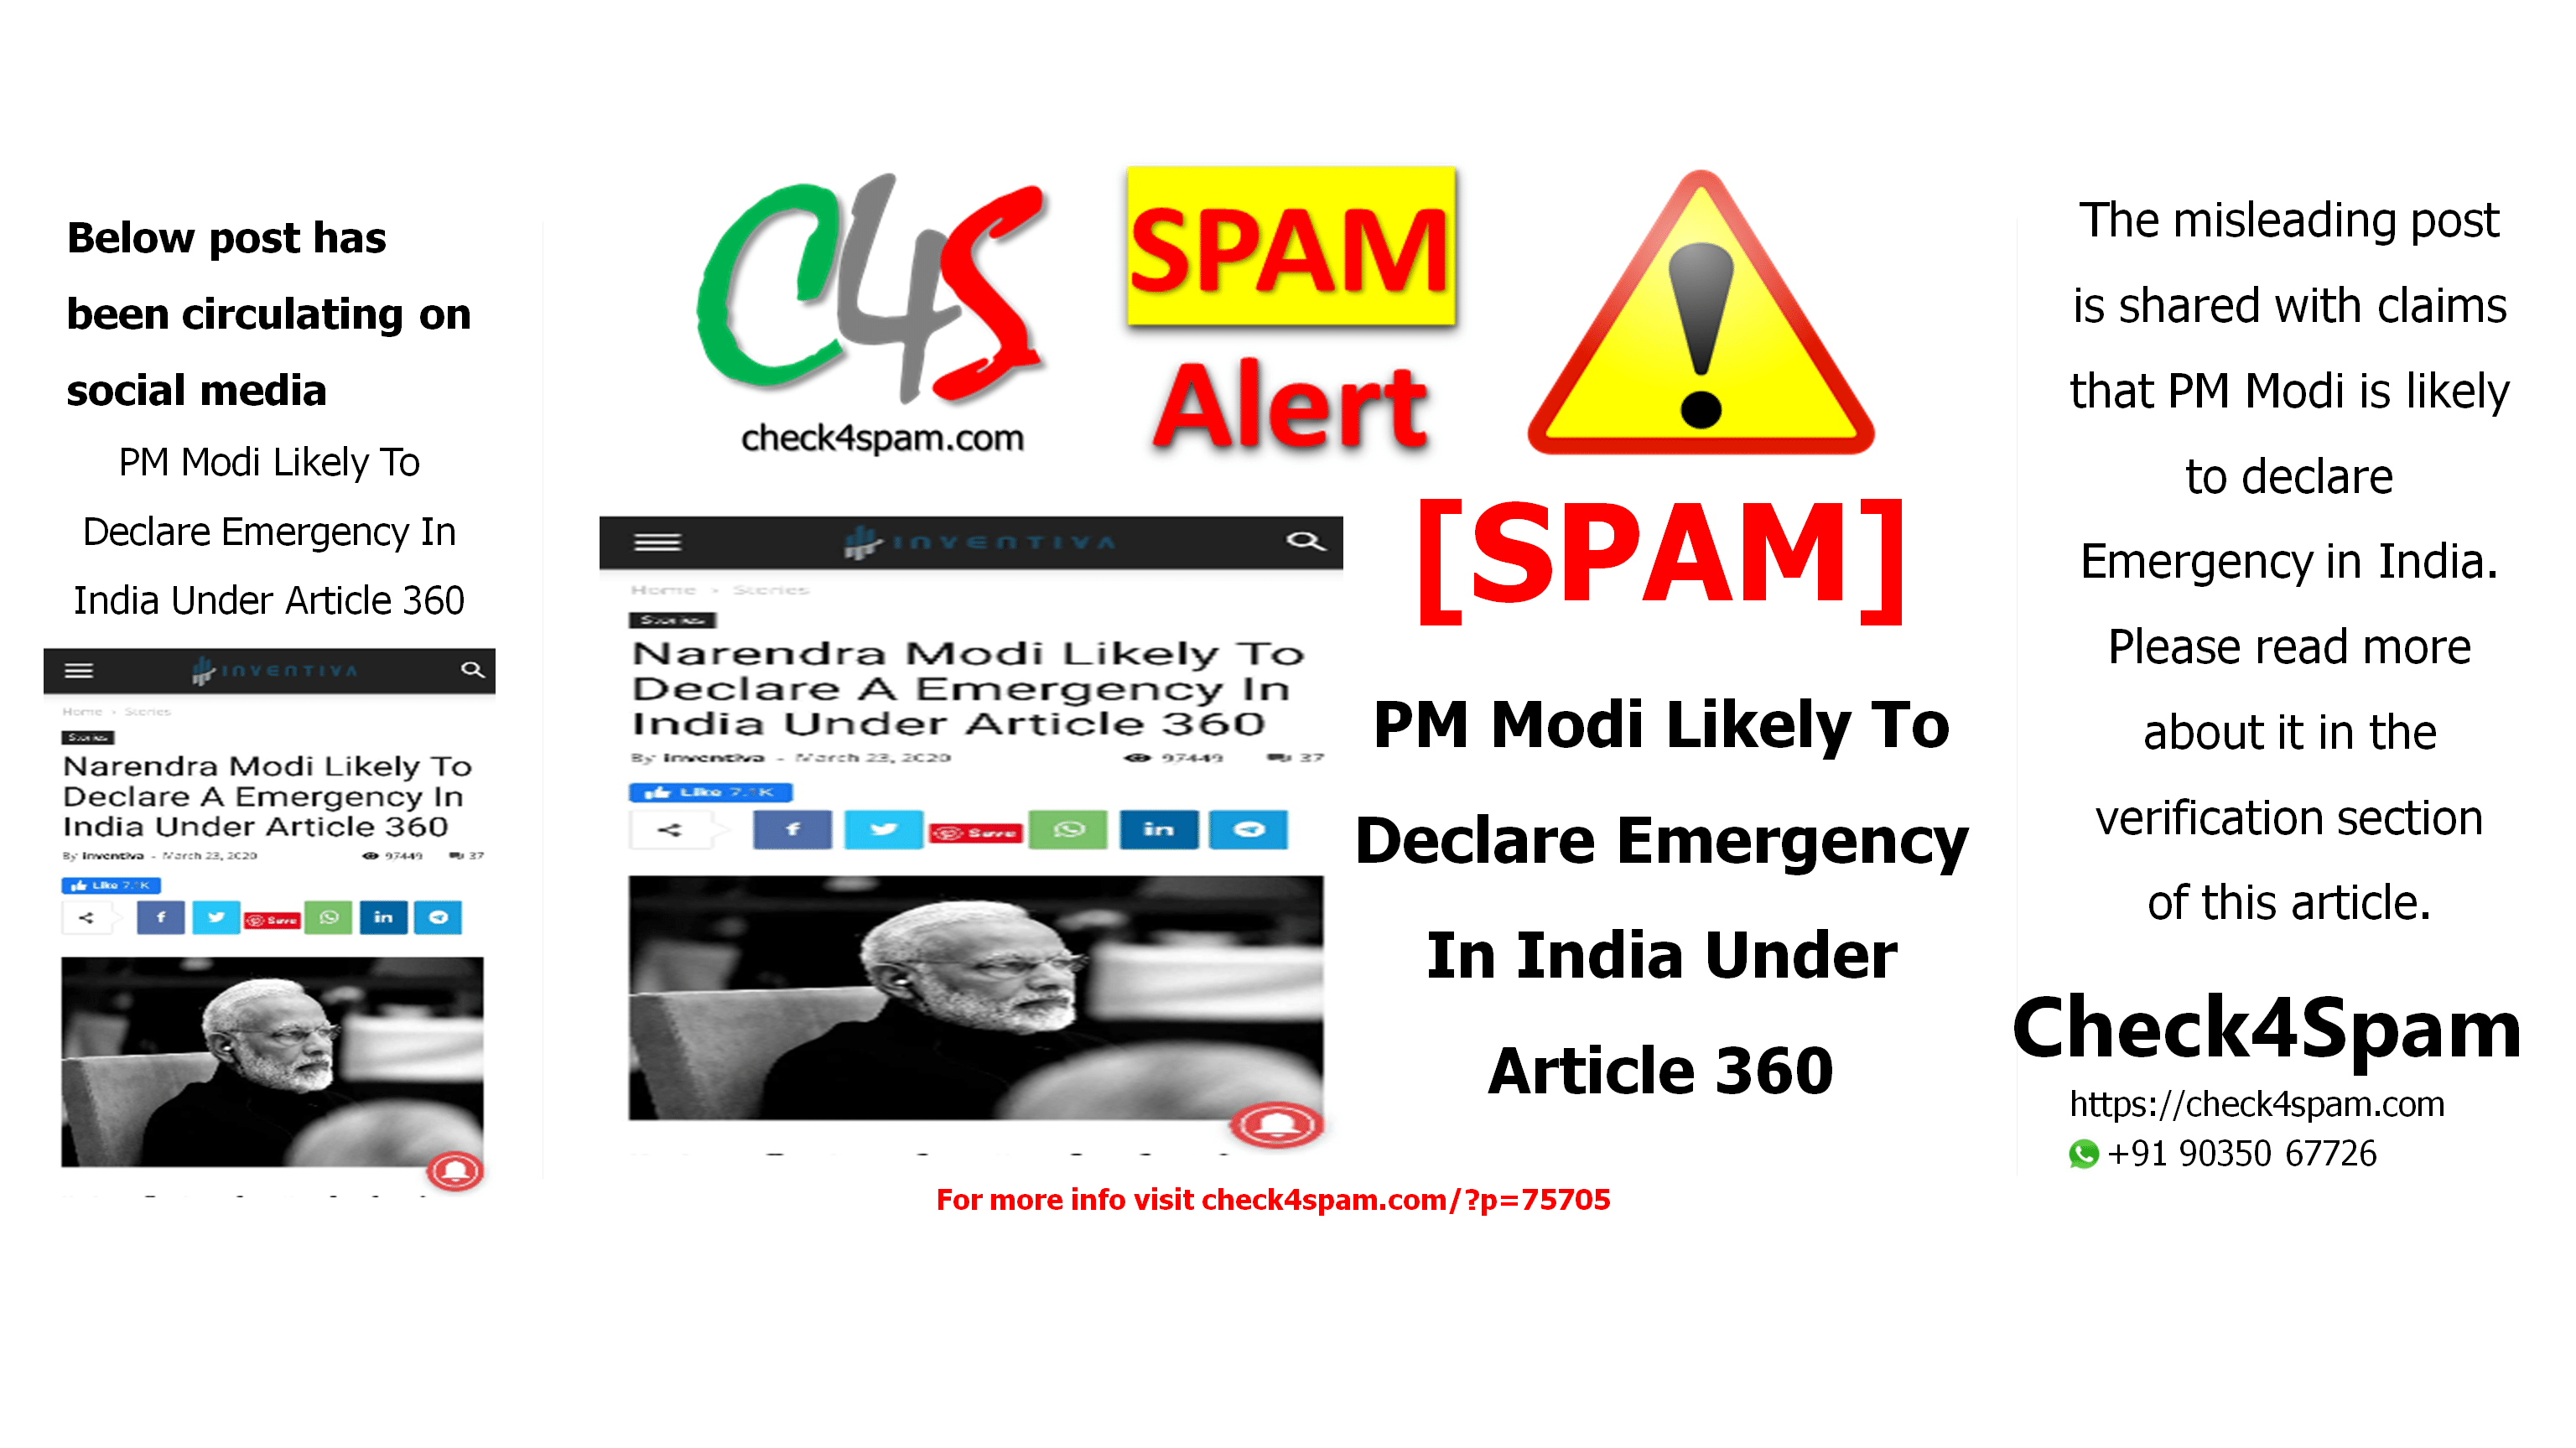 PM Modi Likely To Declare Emergency In India Under Article 360